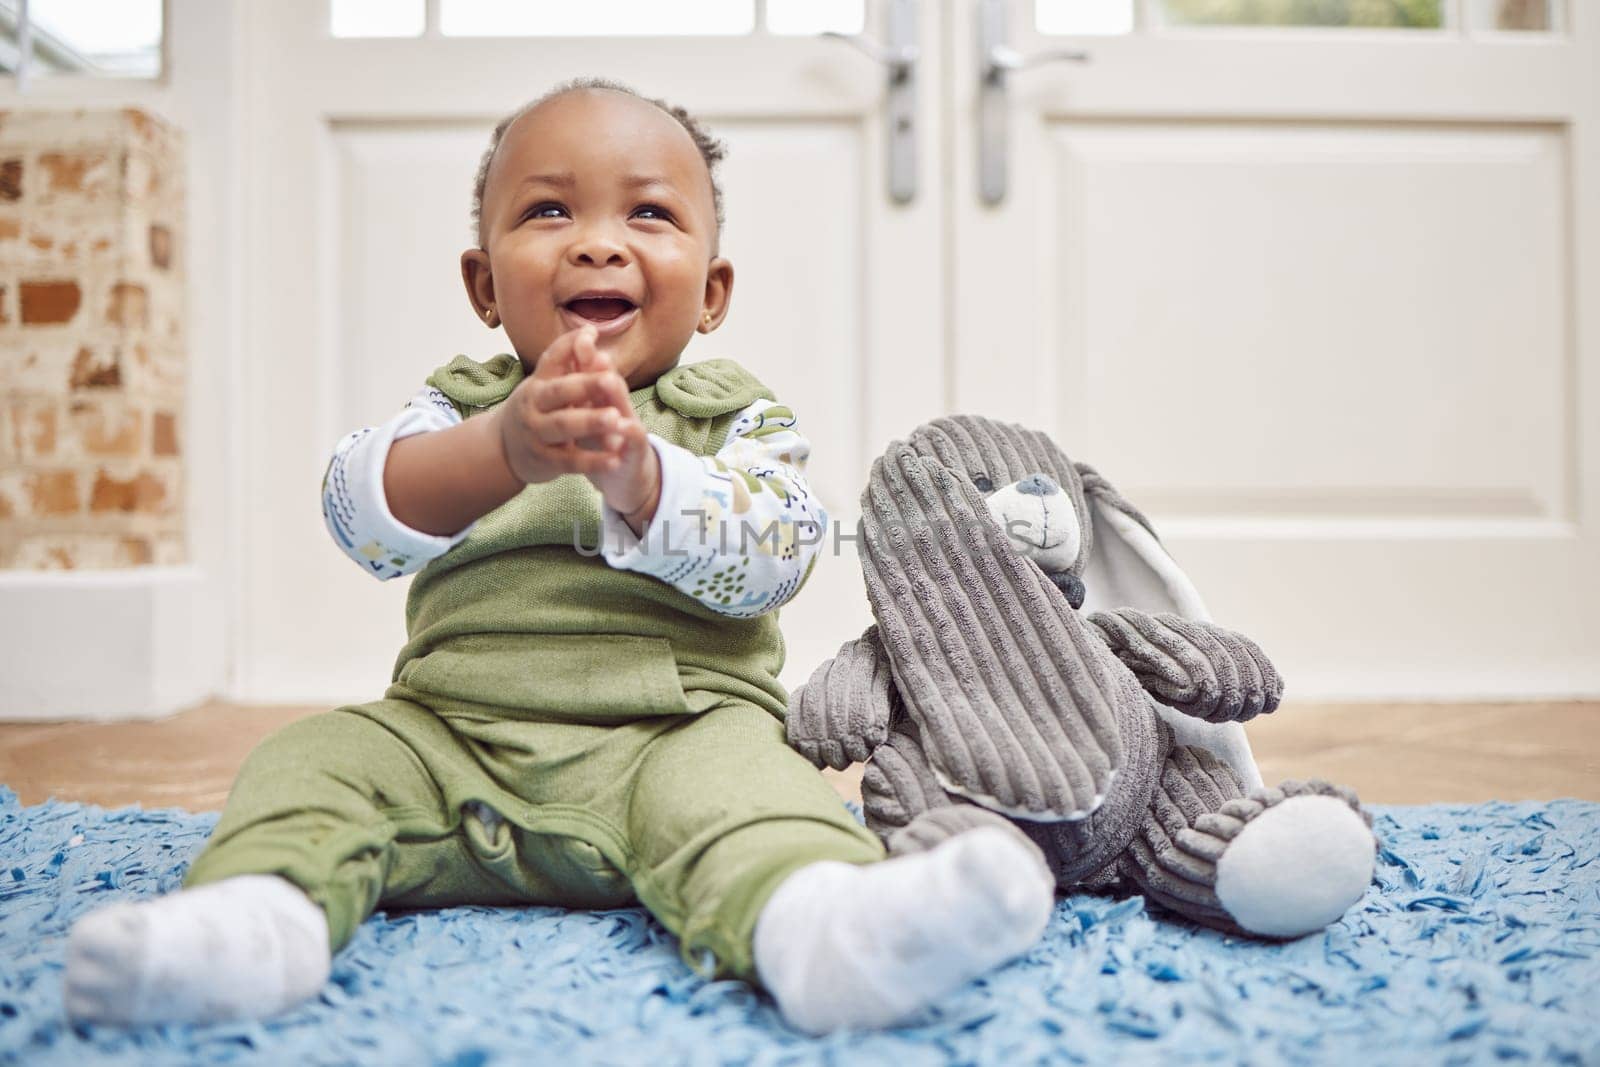 Smile, baby and black child clapping in home, having fun or enjoying teddy bear. African newborn, children and toddler, kid and young infant play, happy or applause for childhood development in house.